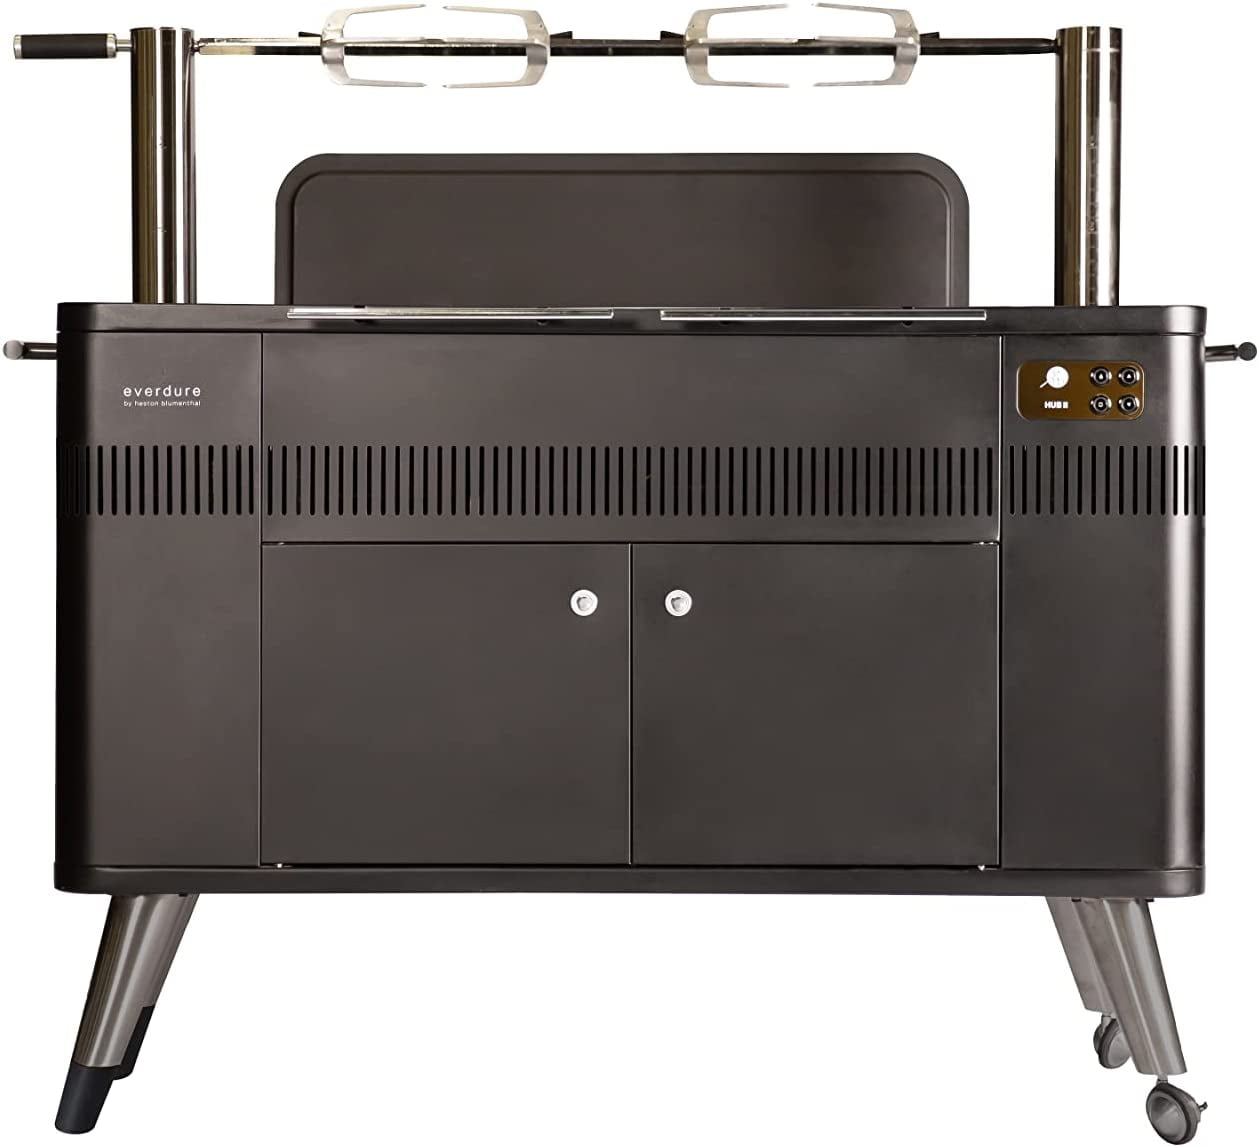 sporadisk Databasen overvældende Everdure HUB II Charcoal Grill with Patented Ignition, Integrated  Rotisserie System, Cool Touch Handles and Storage Cabinets - Walmart.com